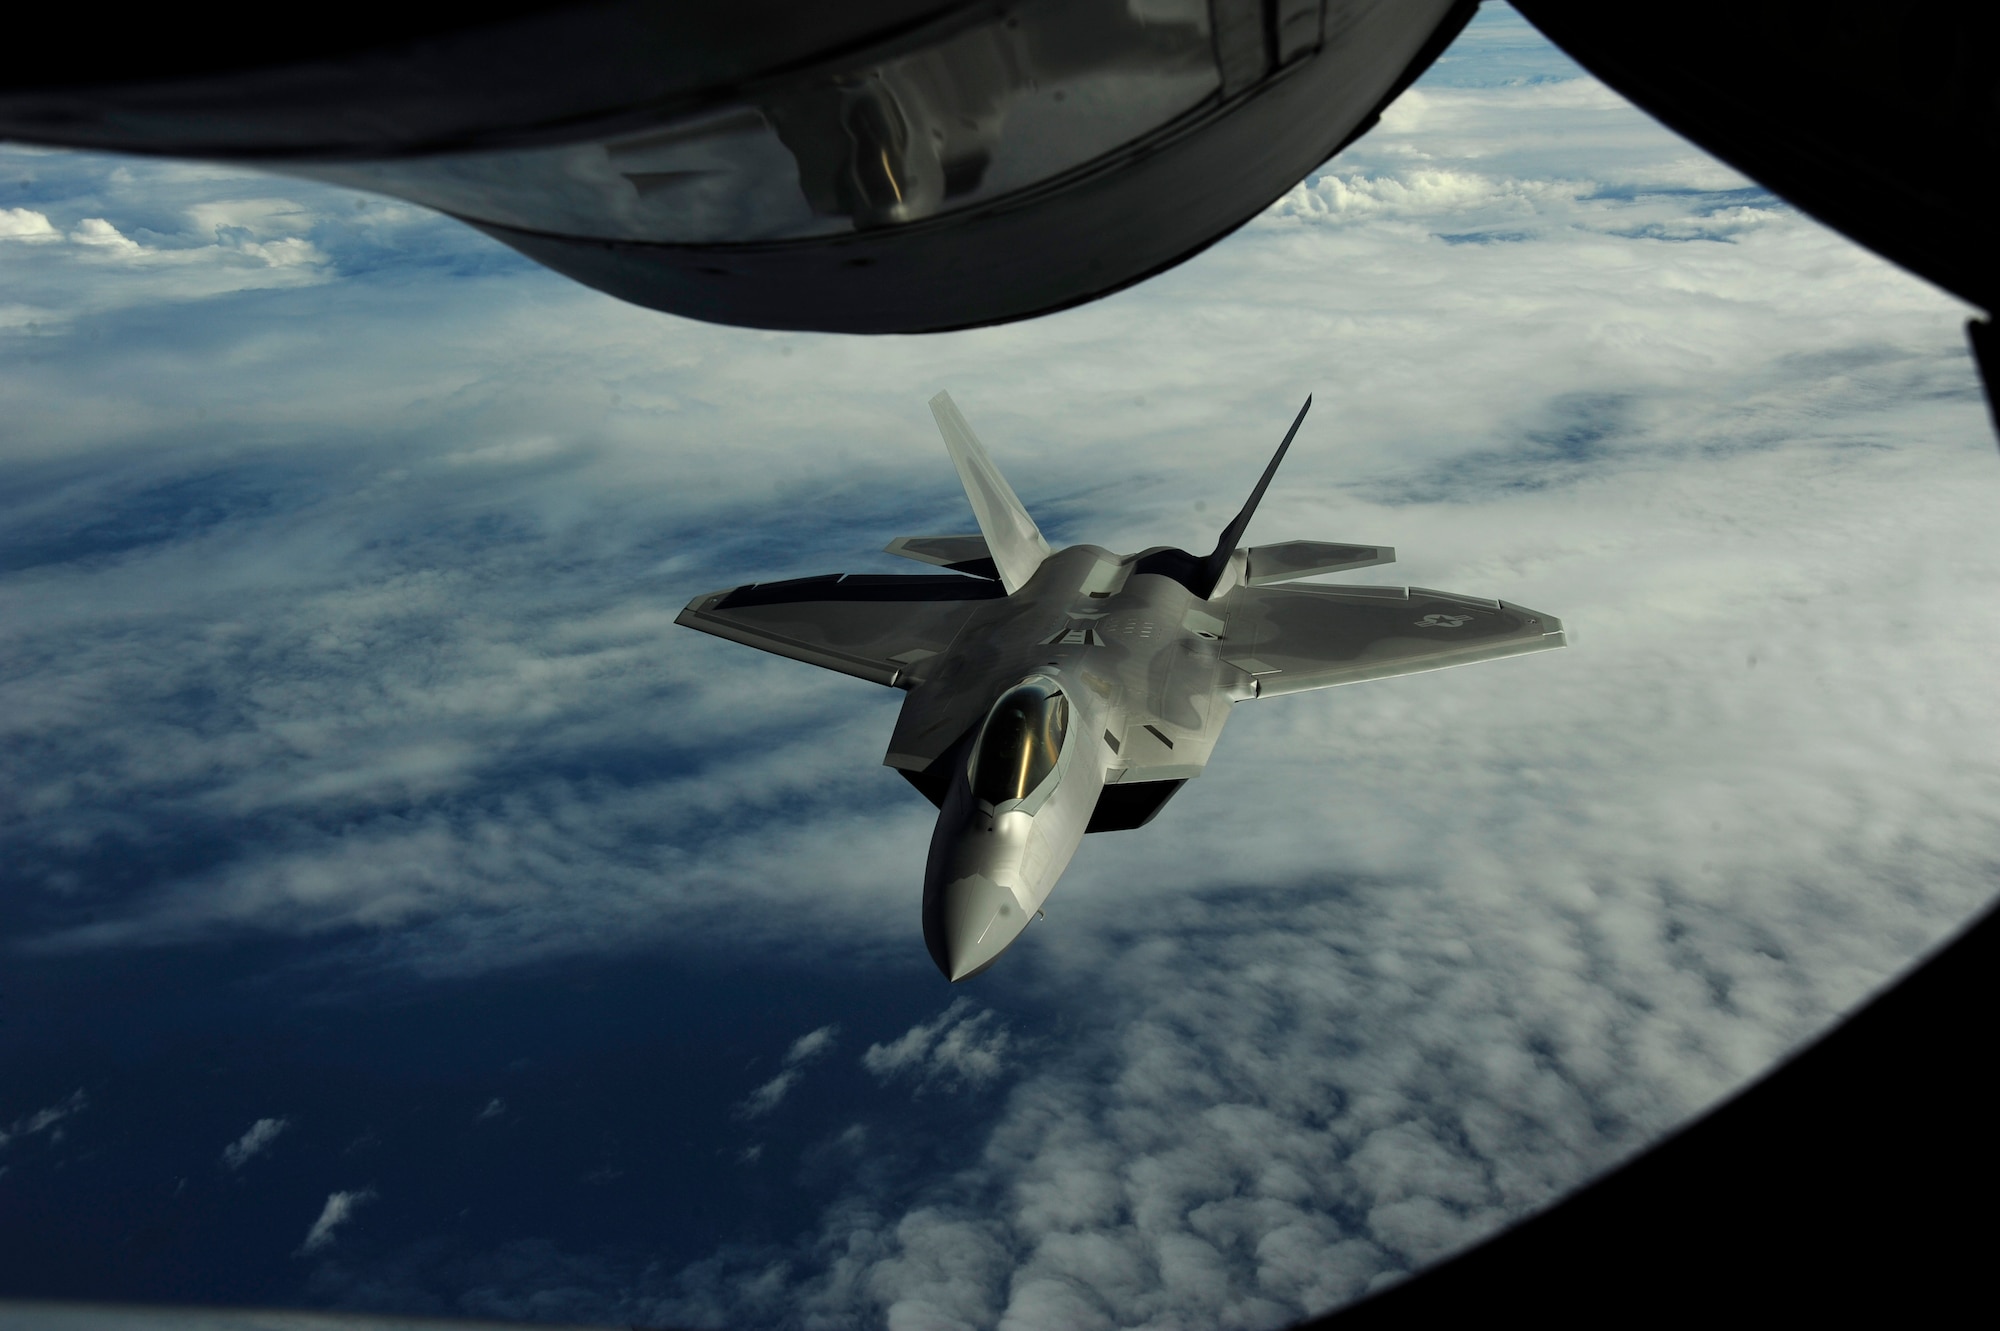 A U.S. Air Force F-22 Raptor assigned to the 90th Fighter Squadron, Elmendorf Air Force Base, Alaska, receives fuel from a KC-135 Stratotanker assigned to the 465 Air Refueling Squadron, Tinker AFB, Okla., near Guam, Feb. 17, 2010.
(U.S. Air Force photo by Staff Sgt. Andy M. Kin / Released)